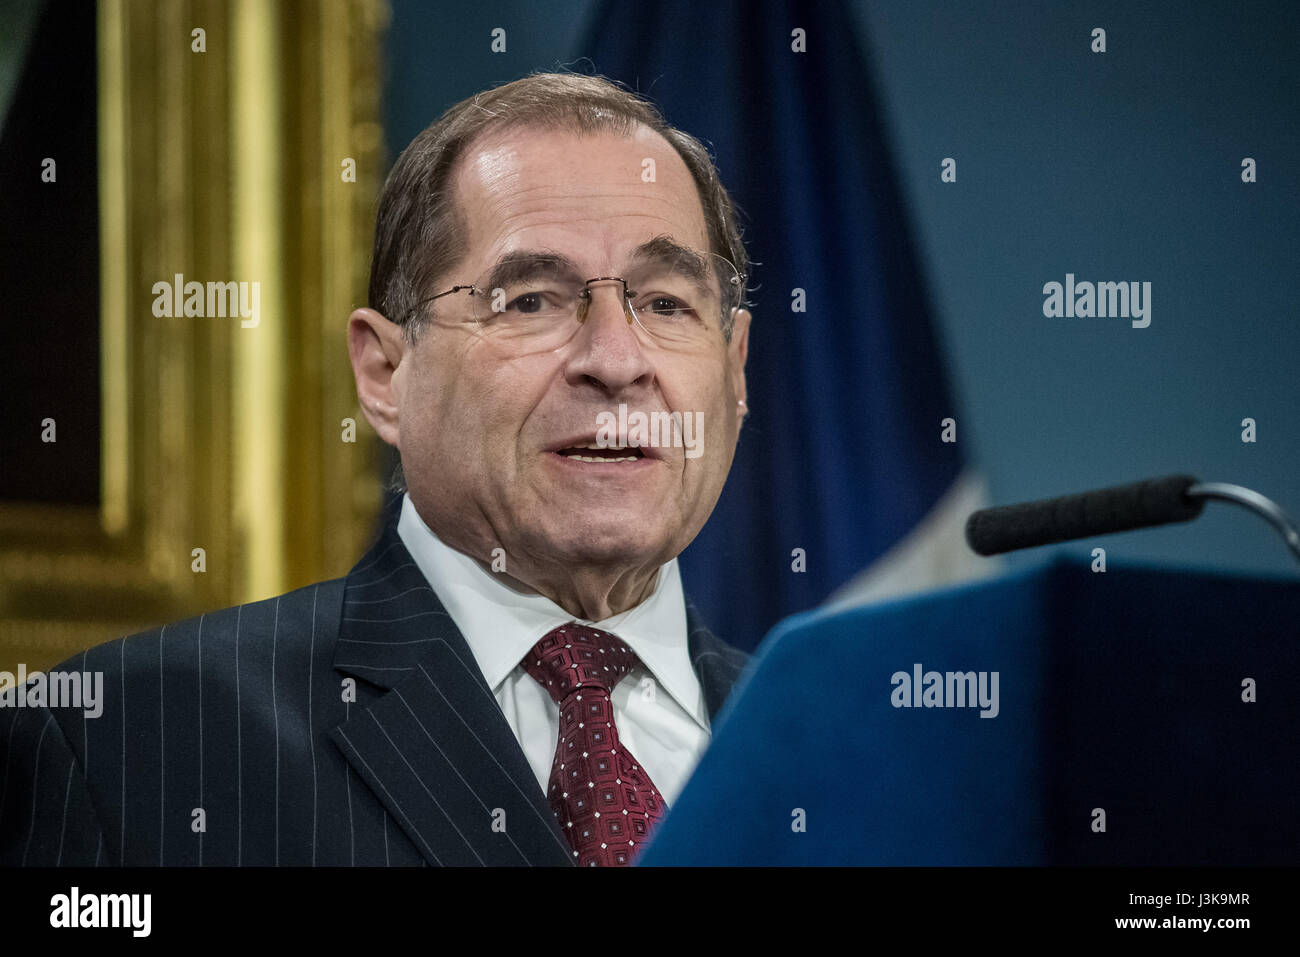 New York, United States. 05th May, 2017. U.S. Representative Jerry Nadler (D - NY 10th District) is seen during the press conference. New York City Mayor Bill de Blasio, joined by U.S. Congress members representing districts in New York City, held a press conference in the Blue Room at City Hall to announce a federal budget deal allowing for $68 million of reimbursements by the federal government for the City's expenses in protecting Trump Tower and the Presidential First Family. Credit: Albin Lohr-Jones/Pacific Press/Alamy Live News Stock Photo